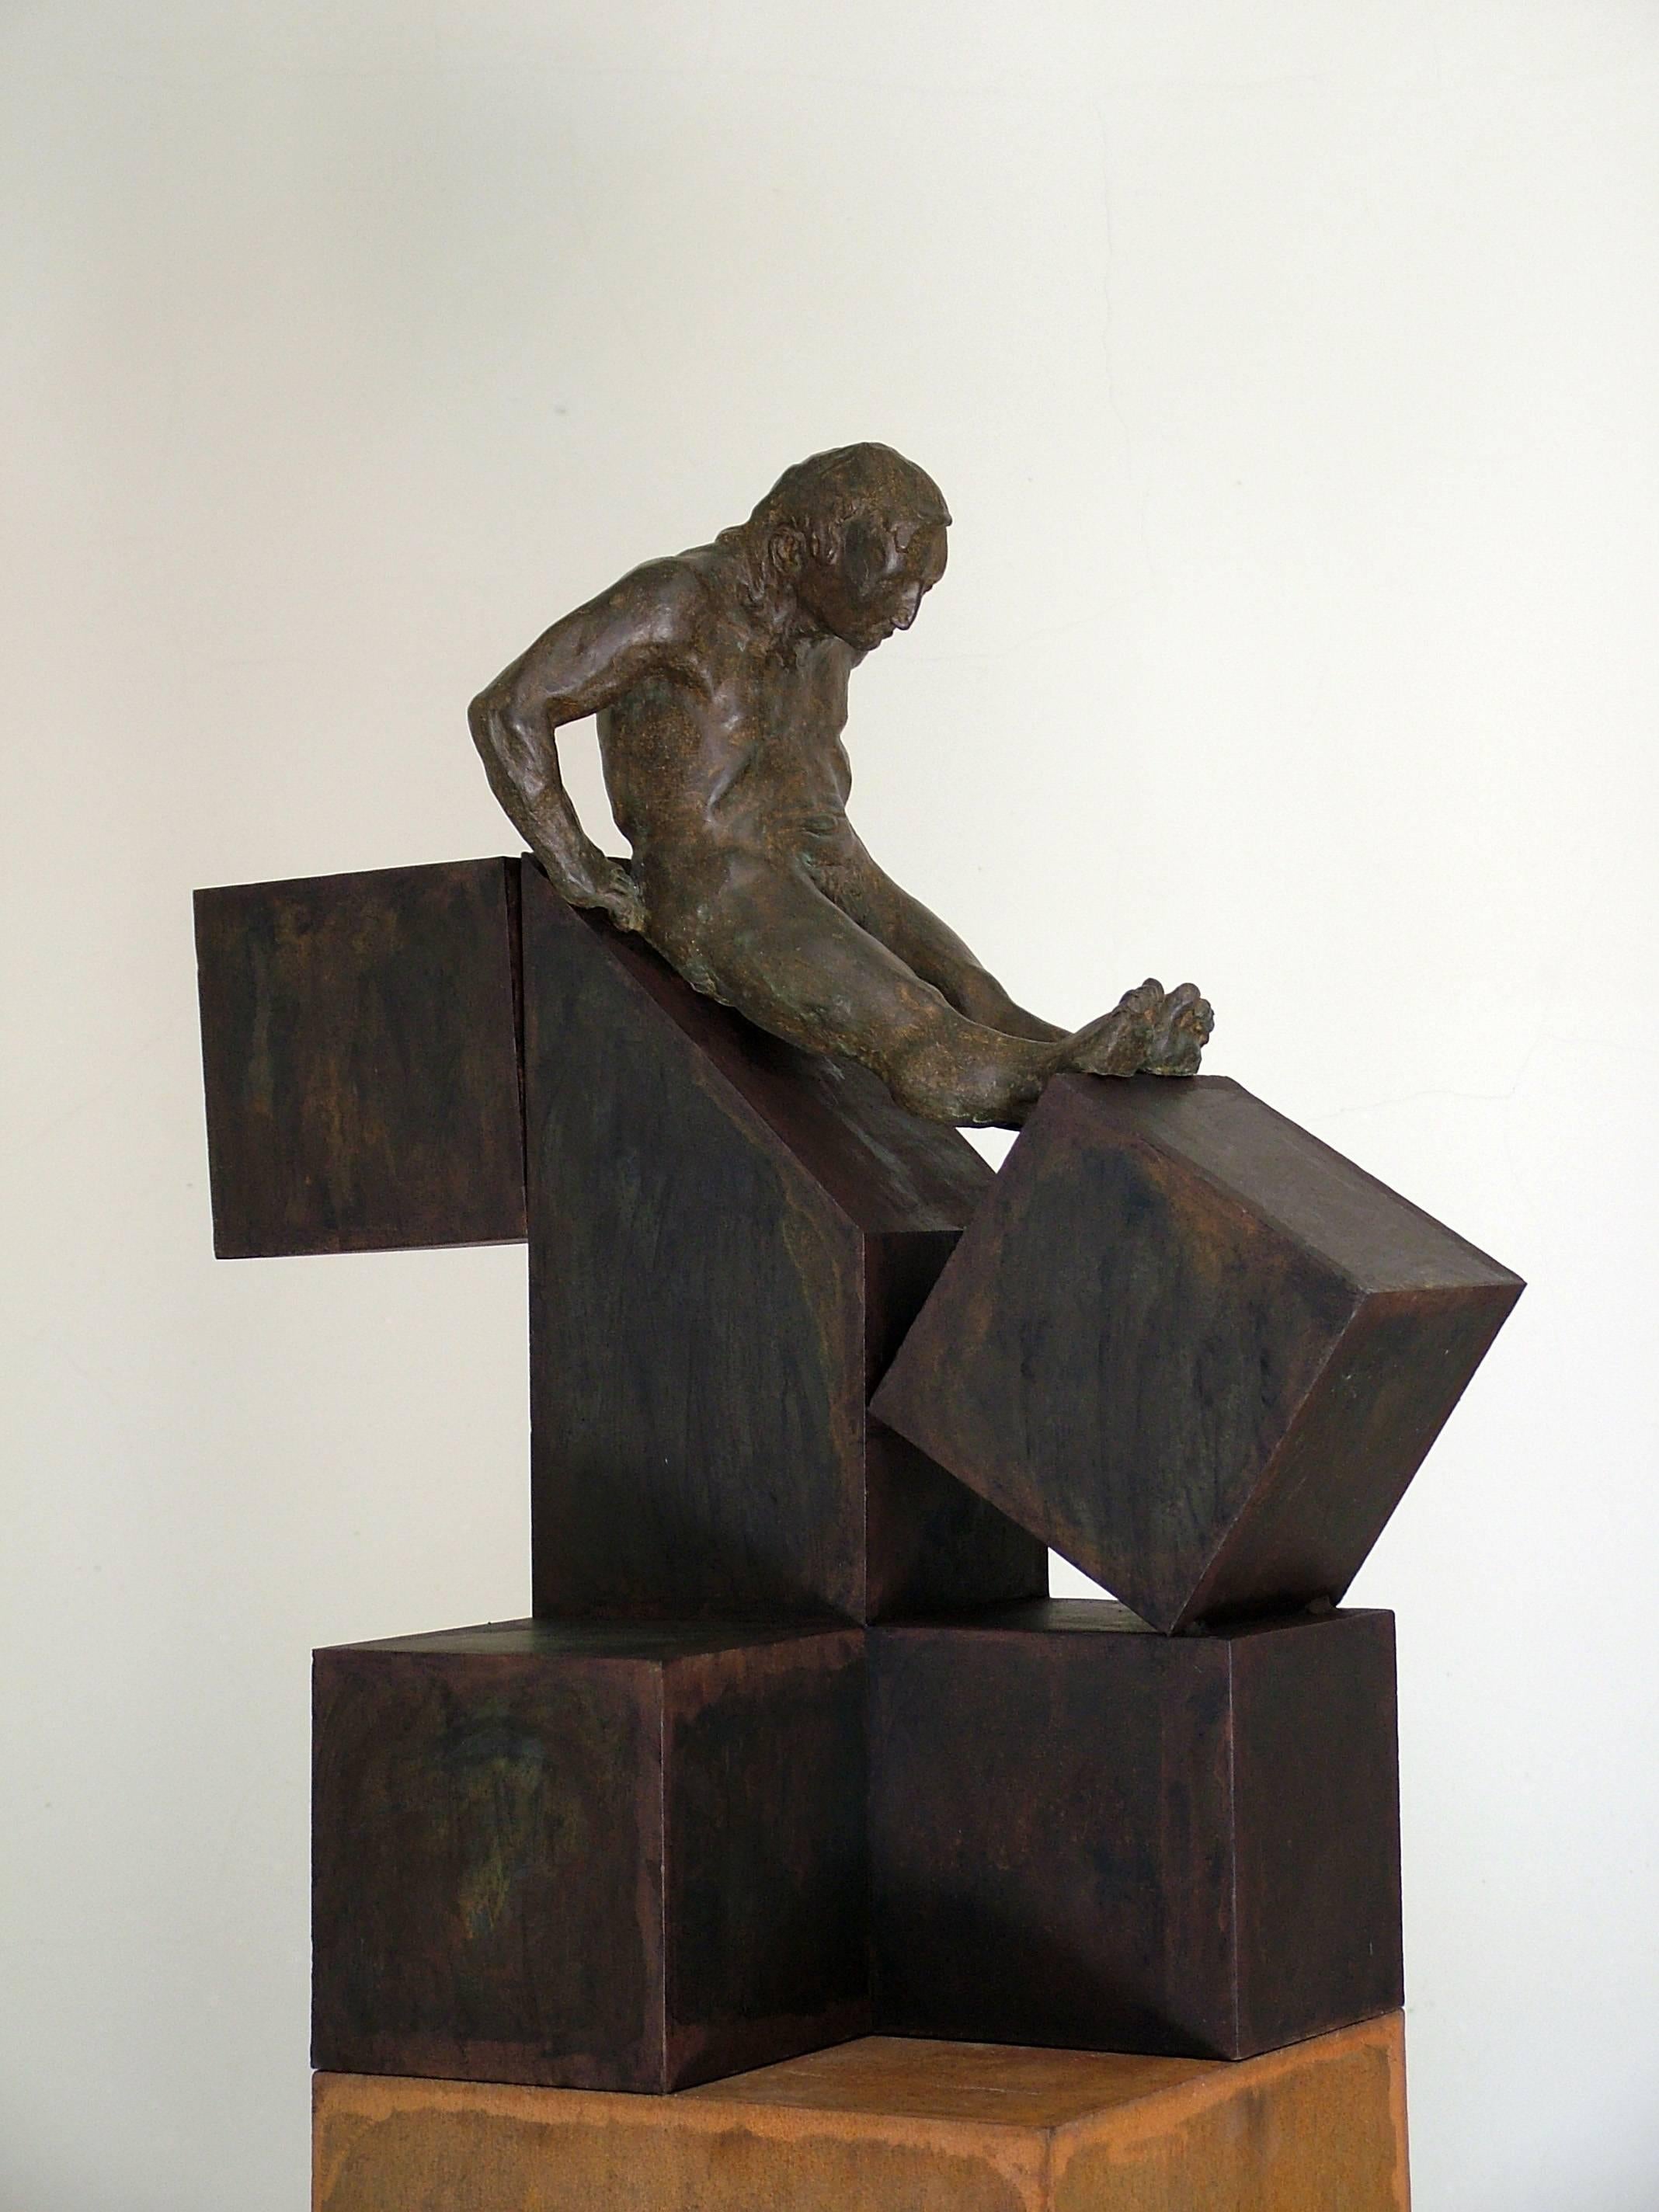 Sculpture by the Spanish artist AMANCIO GONZALEZ
bronze.
Series limited to 7 copies.
Fantastic piece of art representing Spanish sculpture
AMANCIO Gonzalez ( Leon 1965 )

Amancio González is a sculptor from Leon and an internationally celebrated